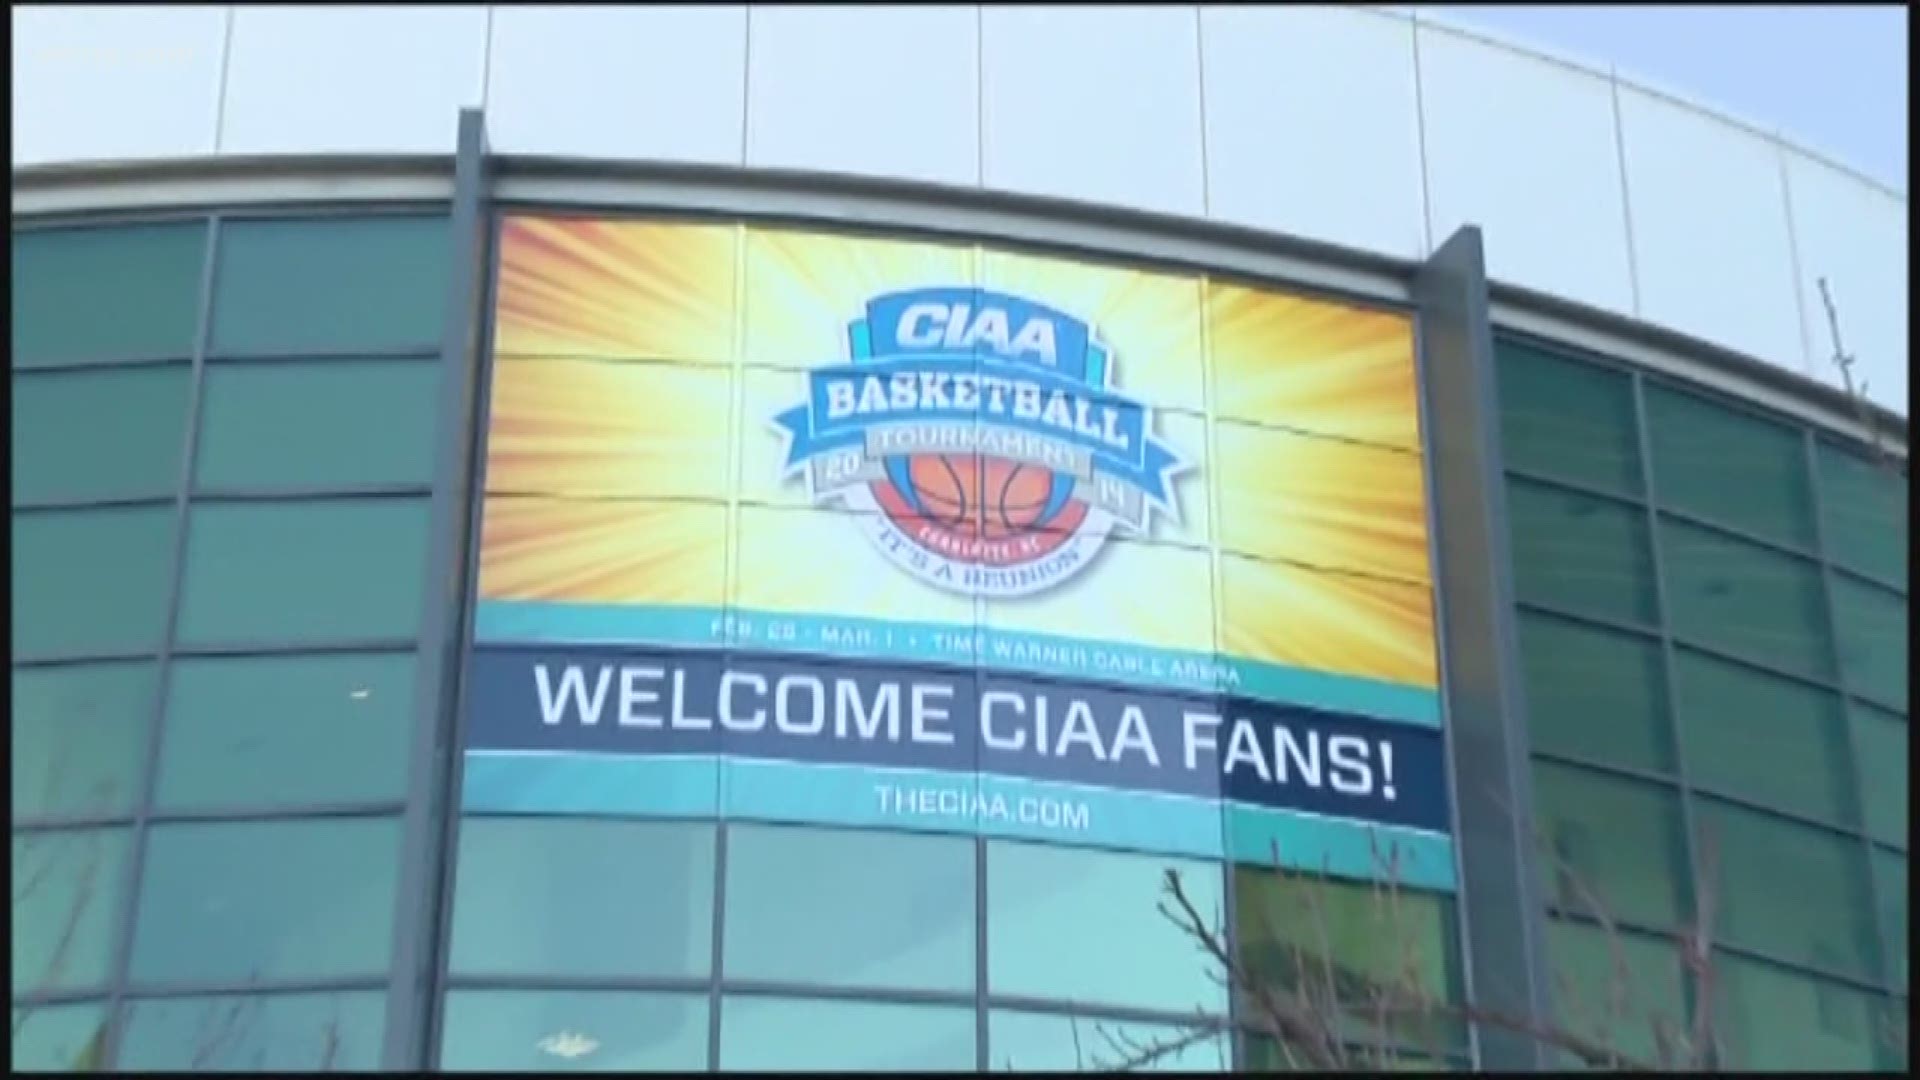 Charlotte is gearing up for another weekend with thousands of fans coming to the Queen City for the 2019 CIAA men's and women's basketball tournaments.